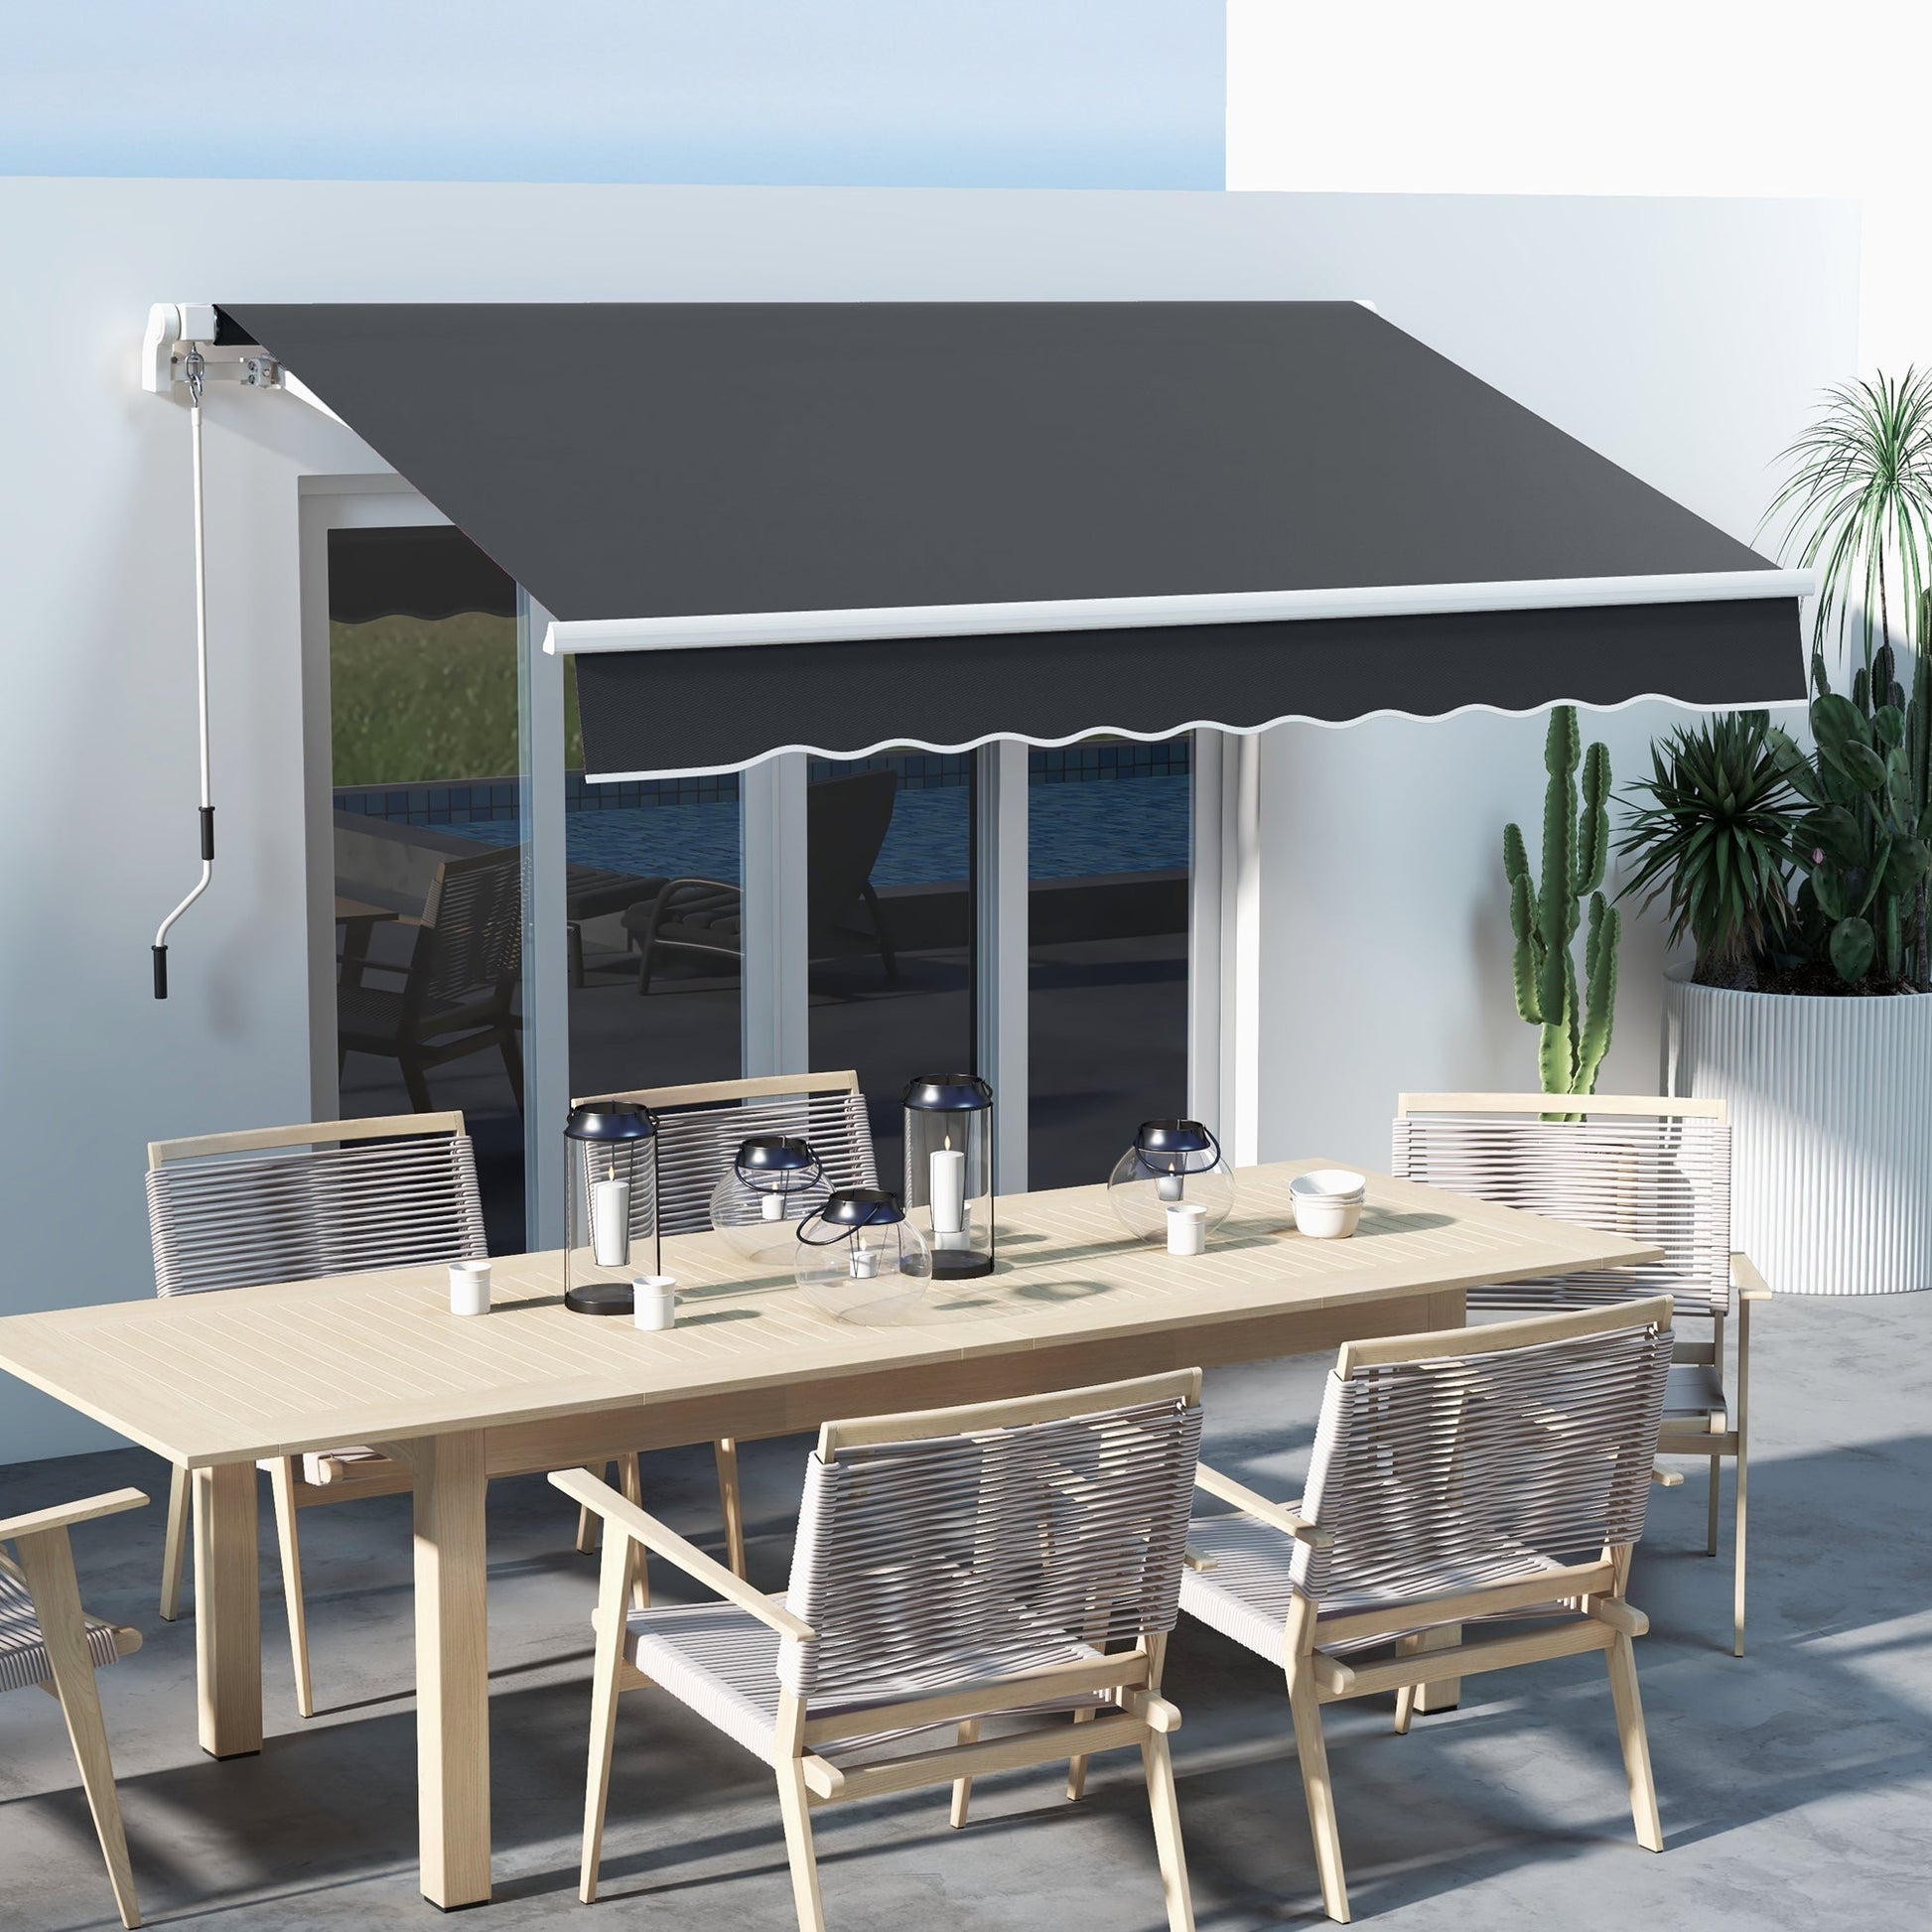 10' x 8' Manual Retractable Awning with LED Lights, Aluminum Frame Sun Canopies for Patio Door Window, Dark Grey at Gallery Canada